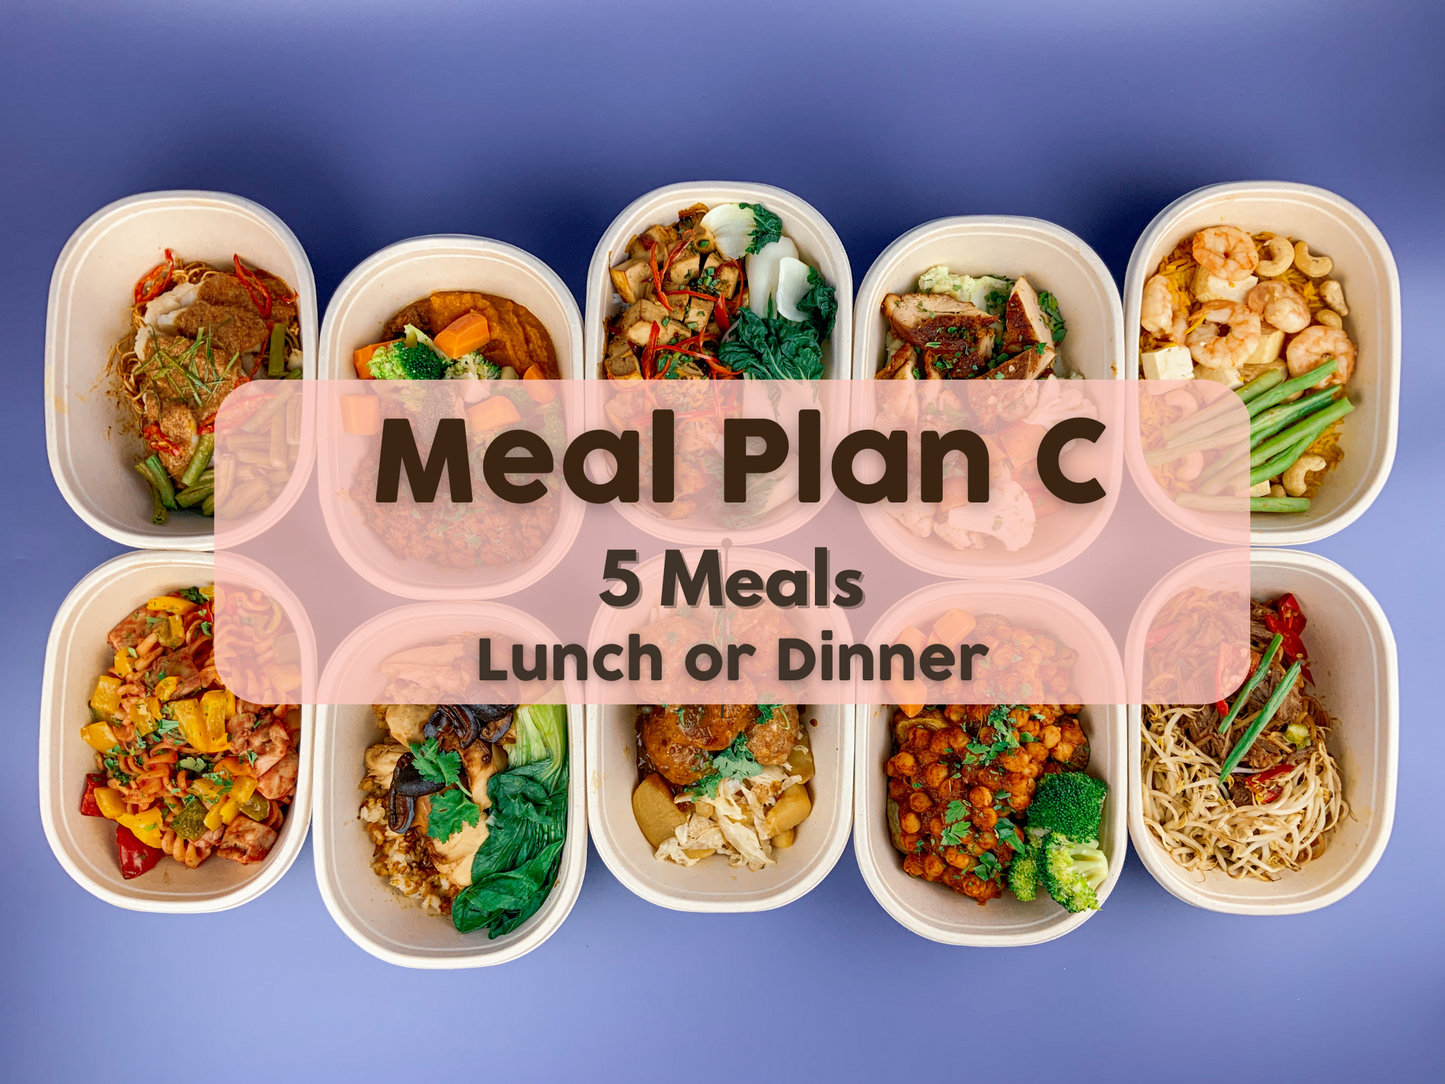 23rd - 27th October Meal Plan C